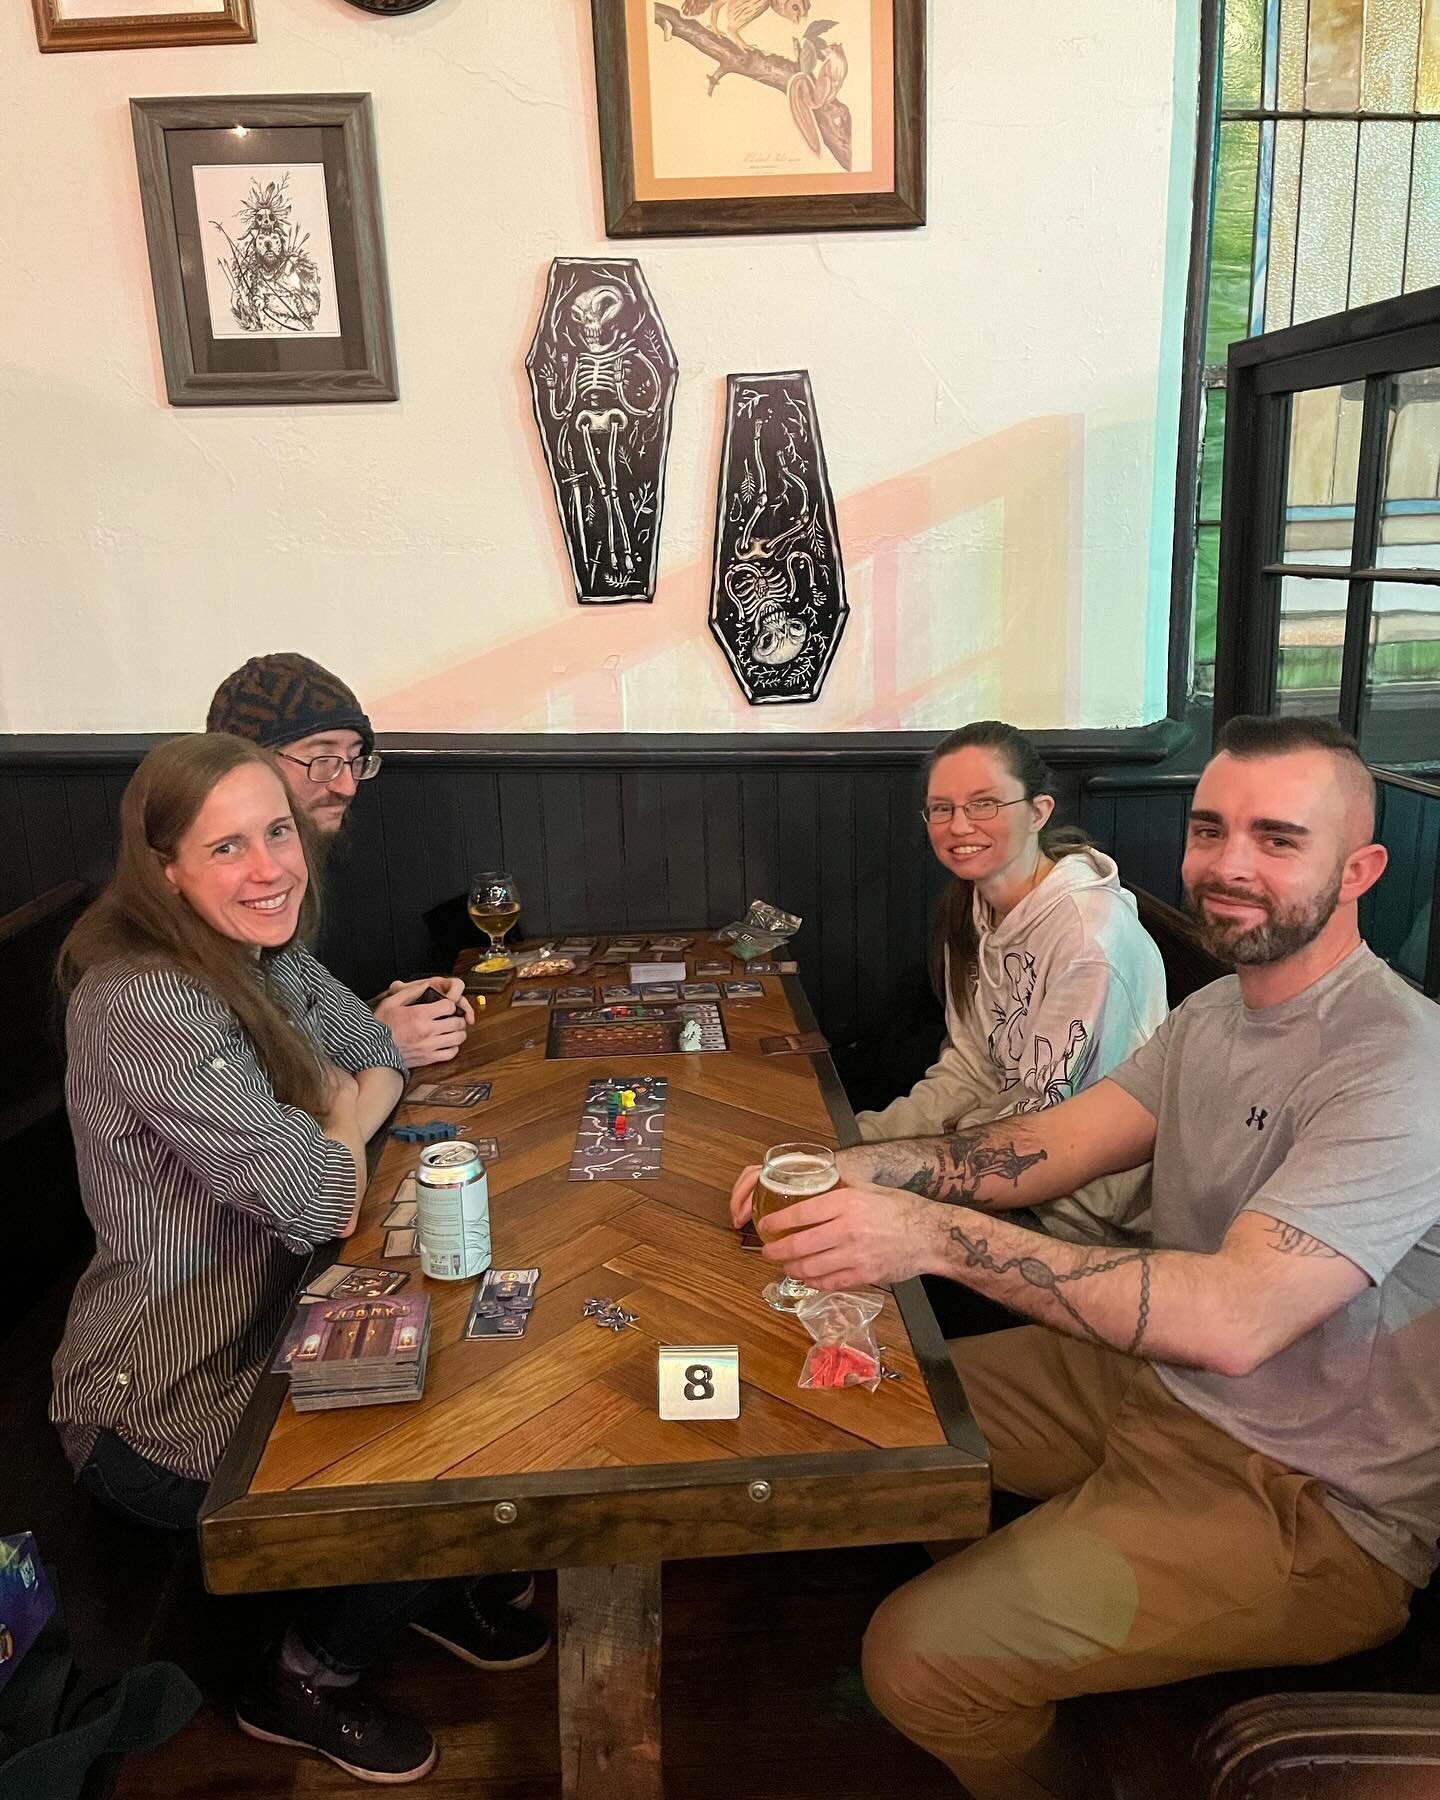 Game night @noblecreaturebeer 🍻
Introduced a lot of games to people new to the modern board gaming hobby!
Top three games played last night. 

1. Dracula vs Van Helsing - 2 player trick taking game and the pair loved it!
2. Point Salad - Quick 2 pla